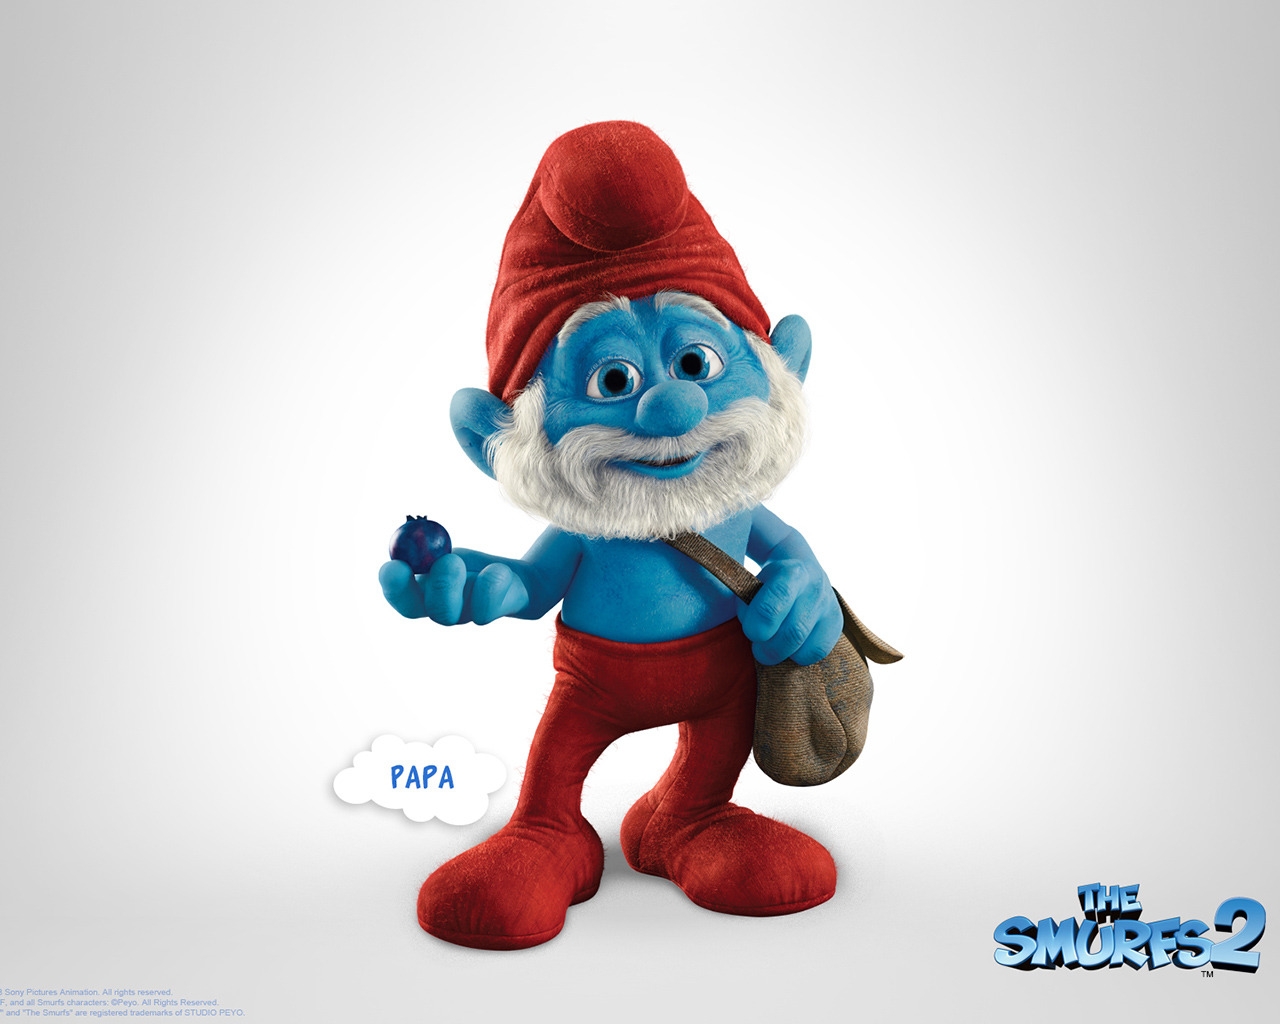 Papa The Smurfs 2 for 1280 x 1024 resolution